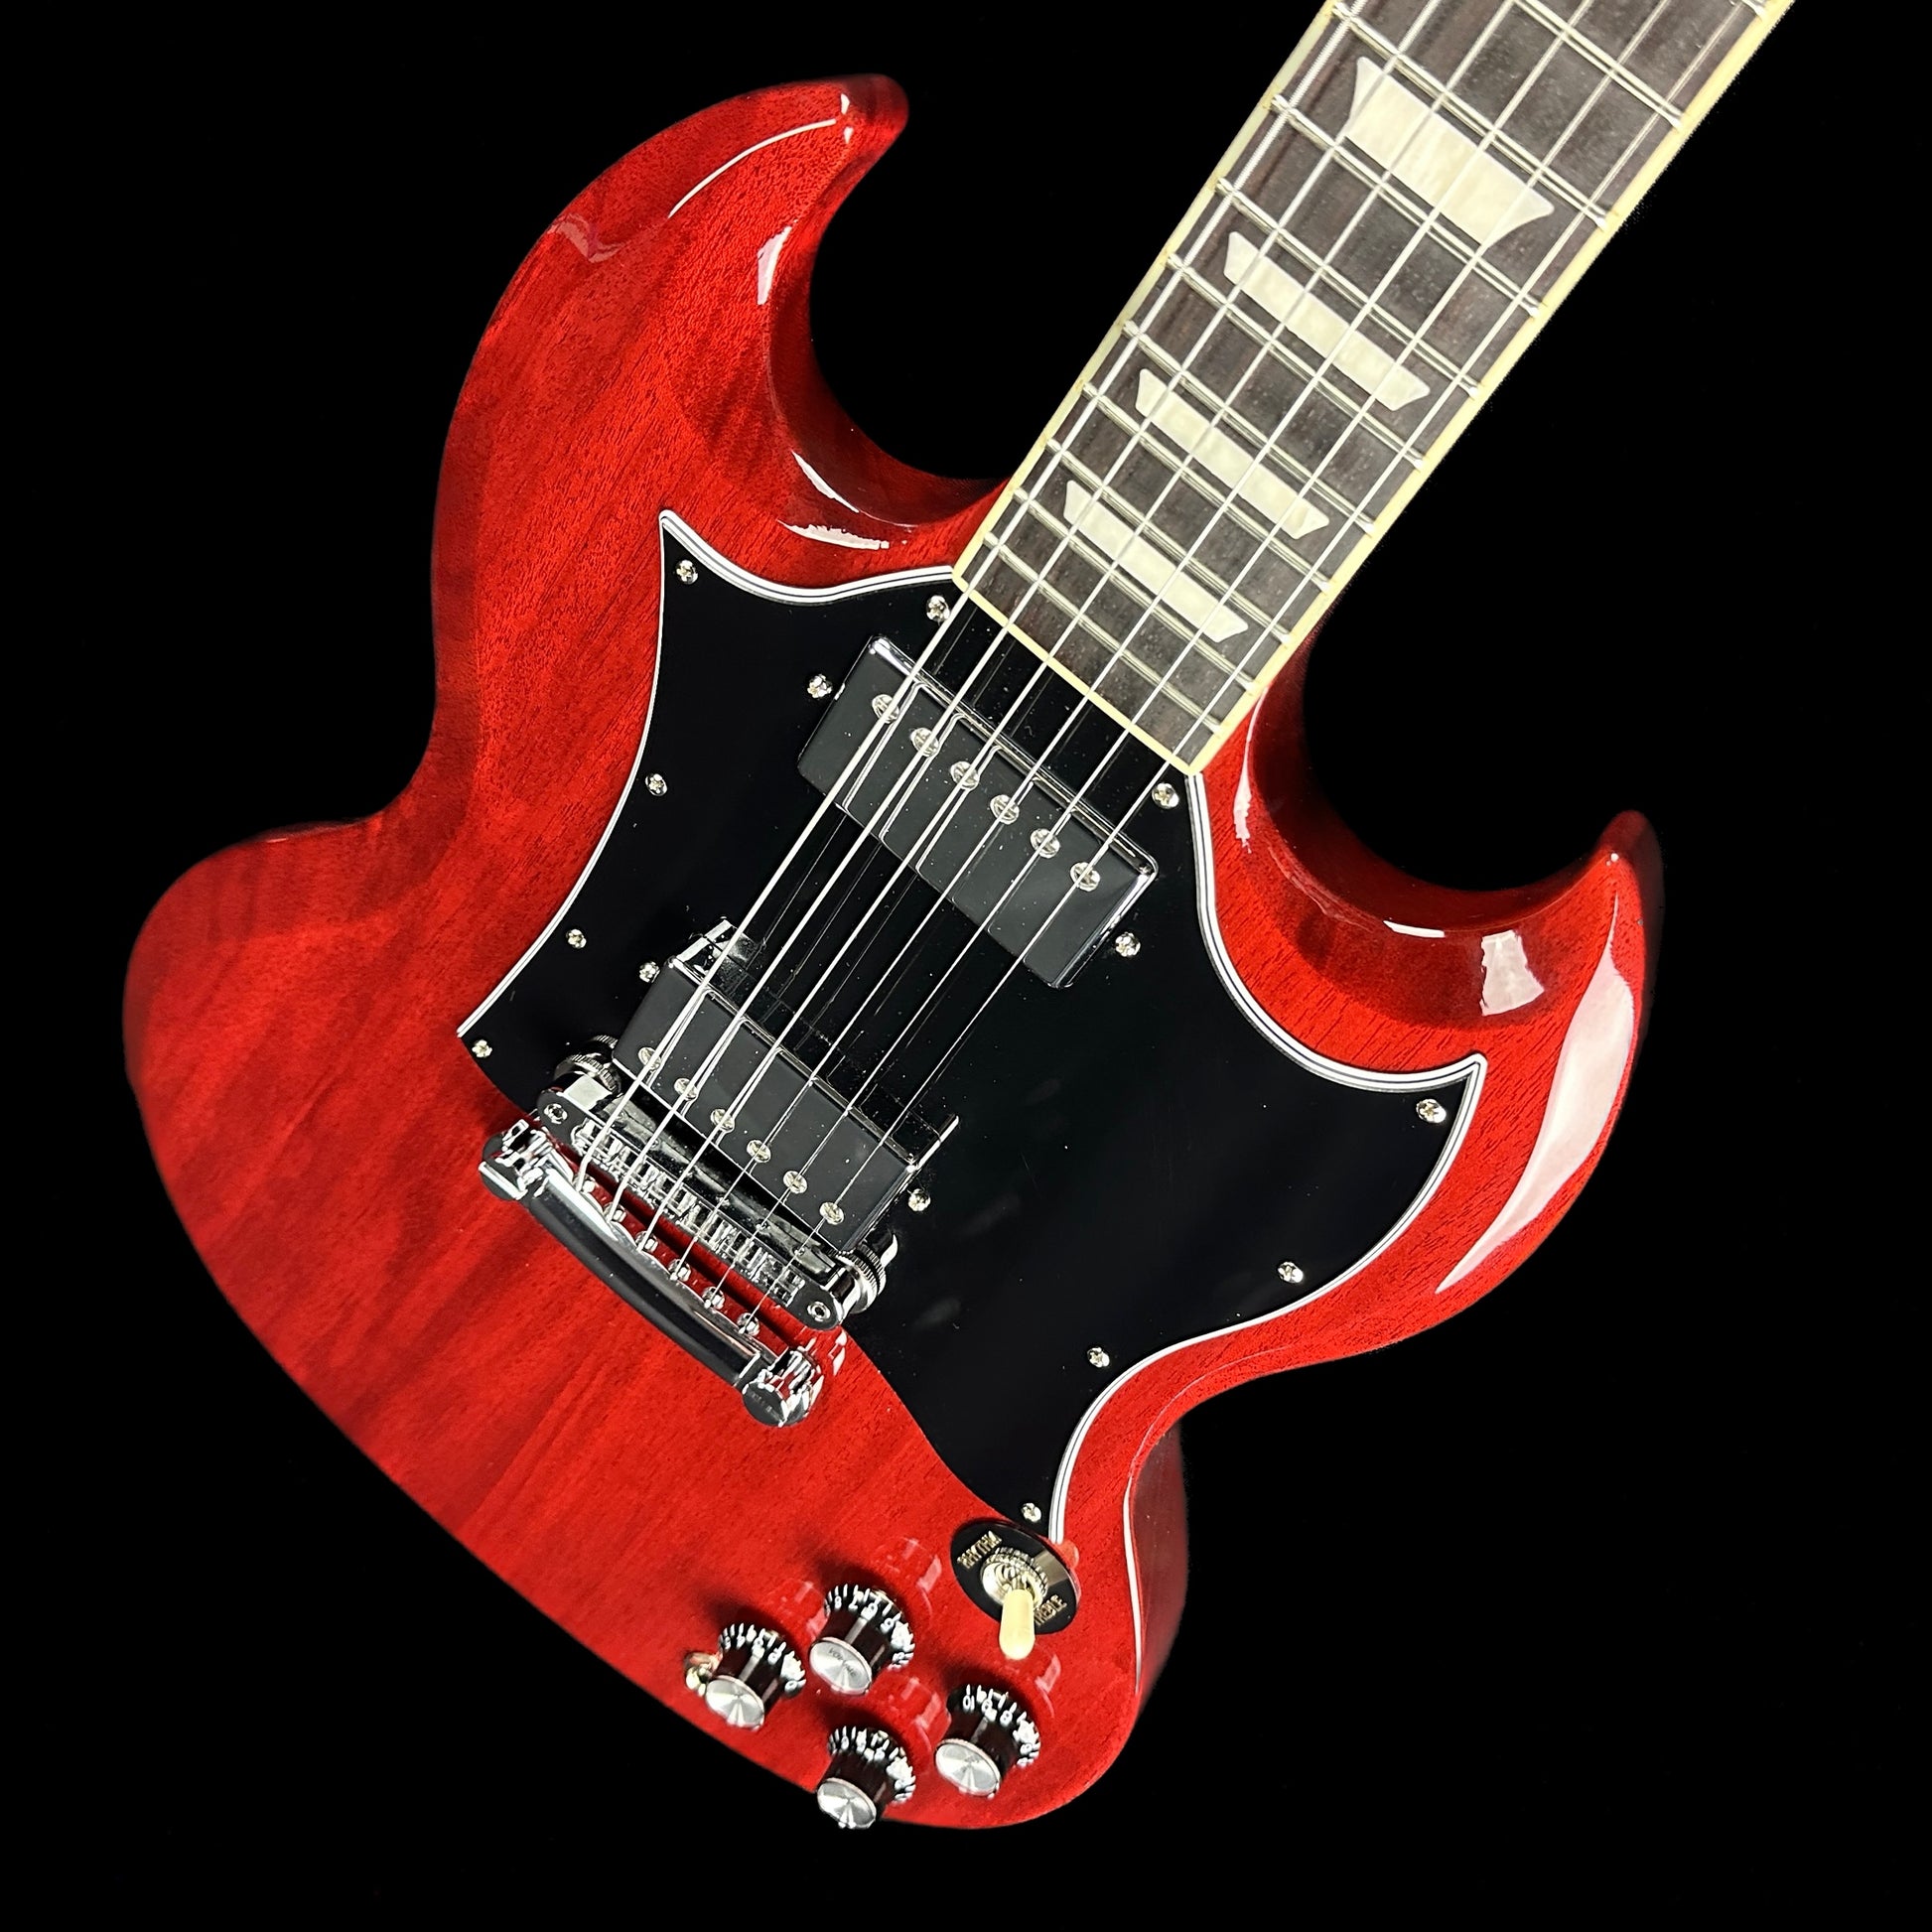 Front angle of Used Gibson SG Standard Cherry.